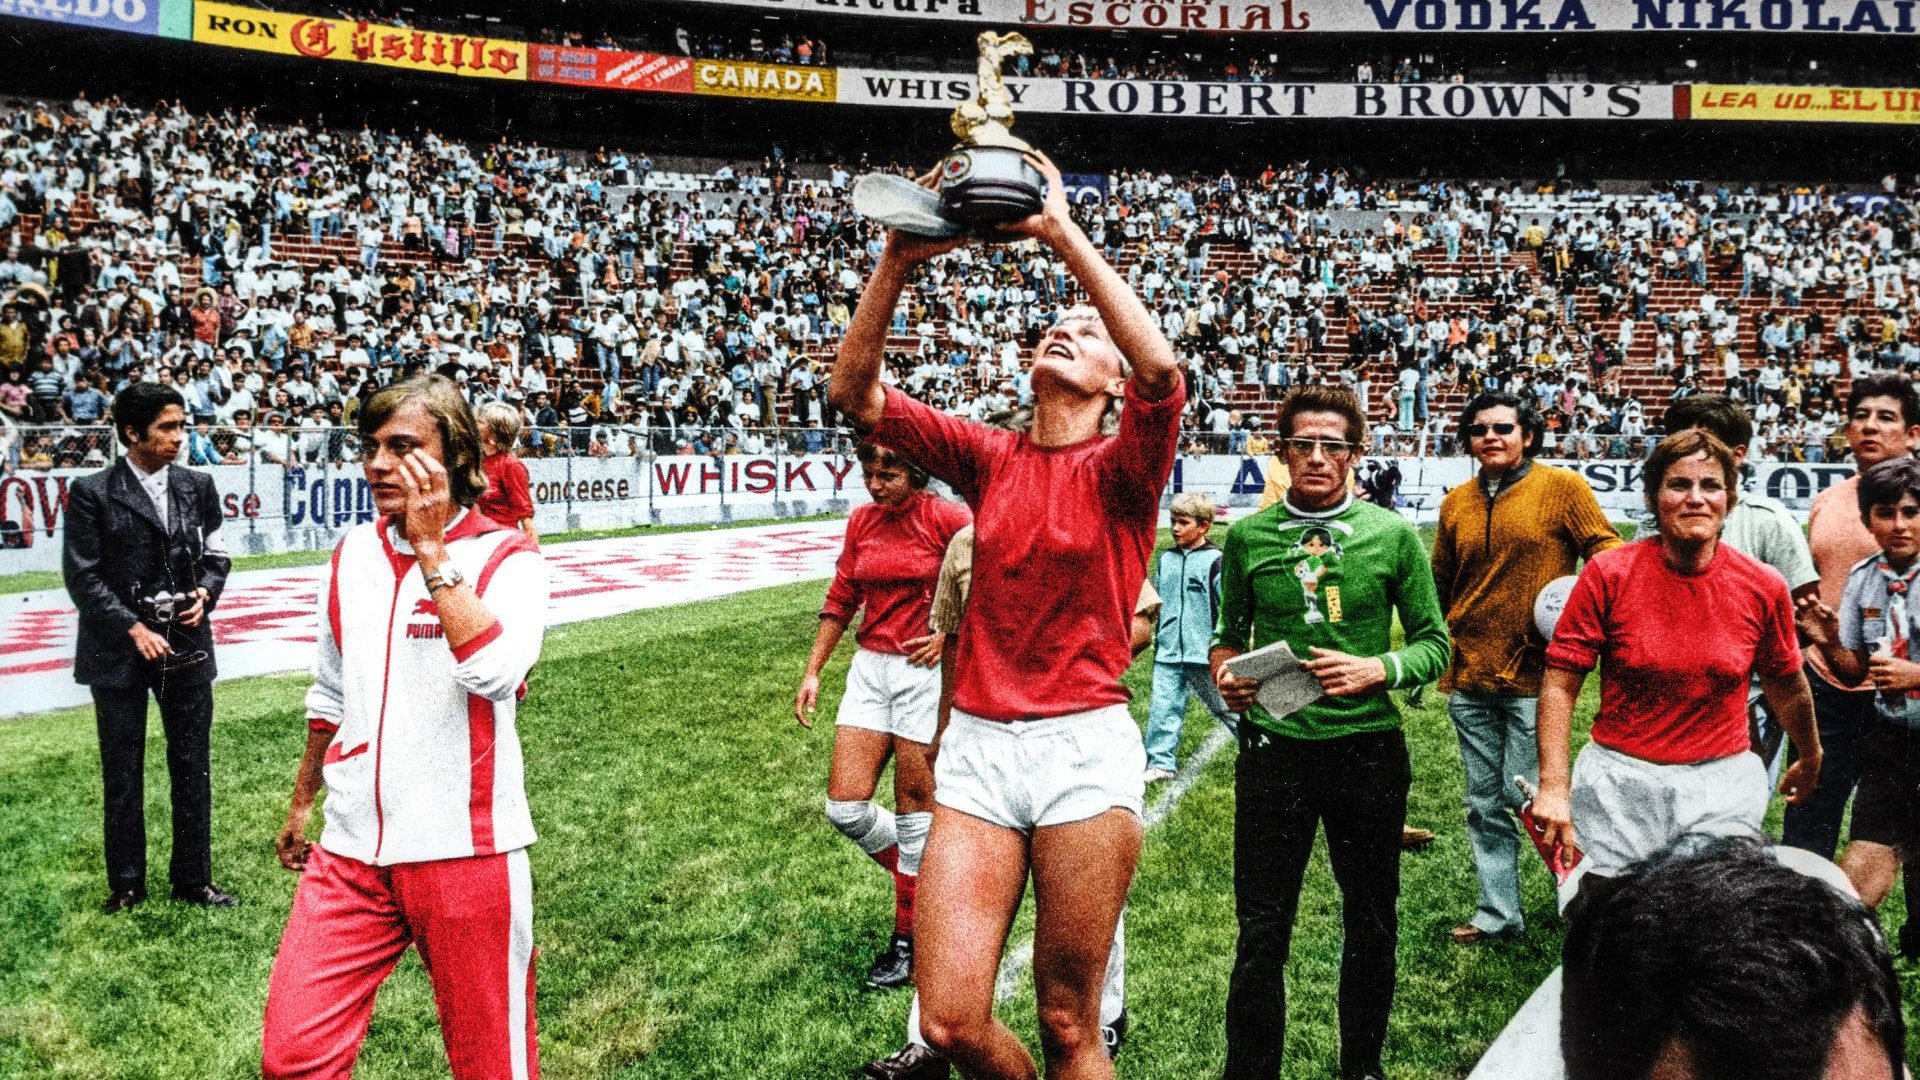 Lis Lene Nielsen holds up the trophy after her Denmark team beat Mexico in the Copa 71 final. Photo: Topfoto/Marina Amaral/New Black Films